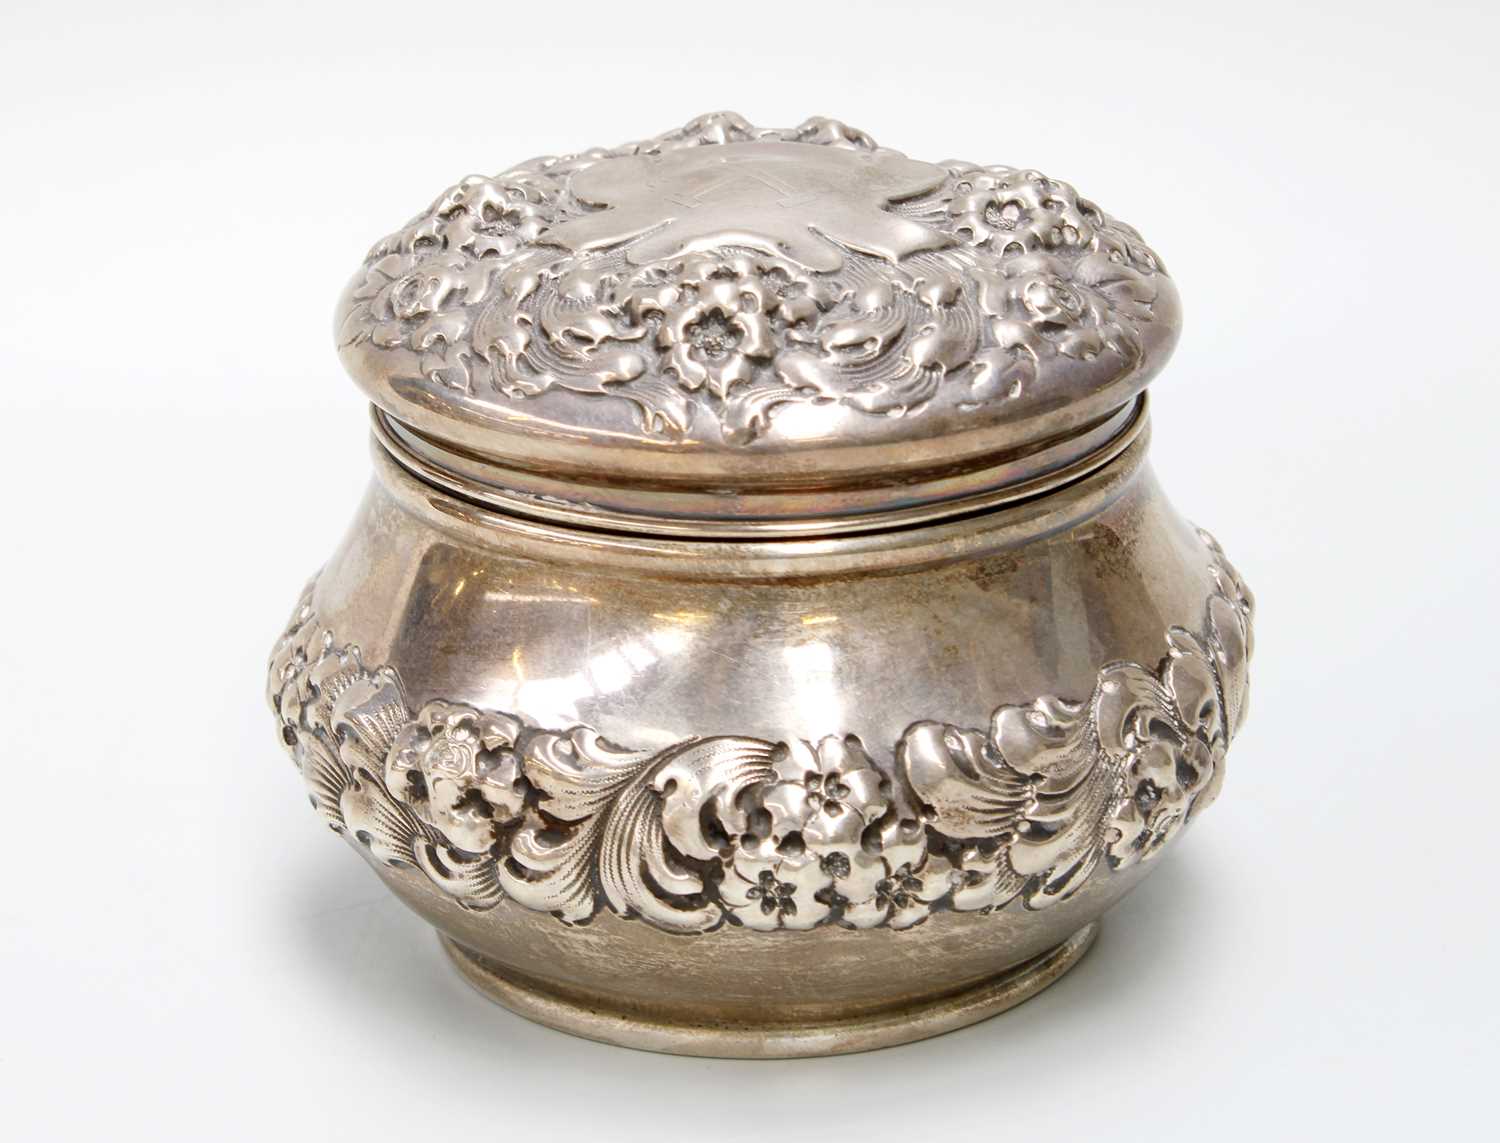 An American Silver Box, by Gorham, Providence, Rhode Island, Late 19th Century, baluster, chased